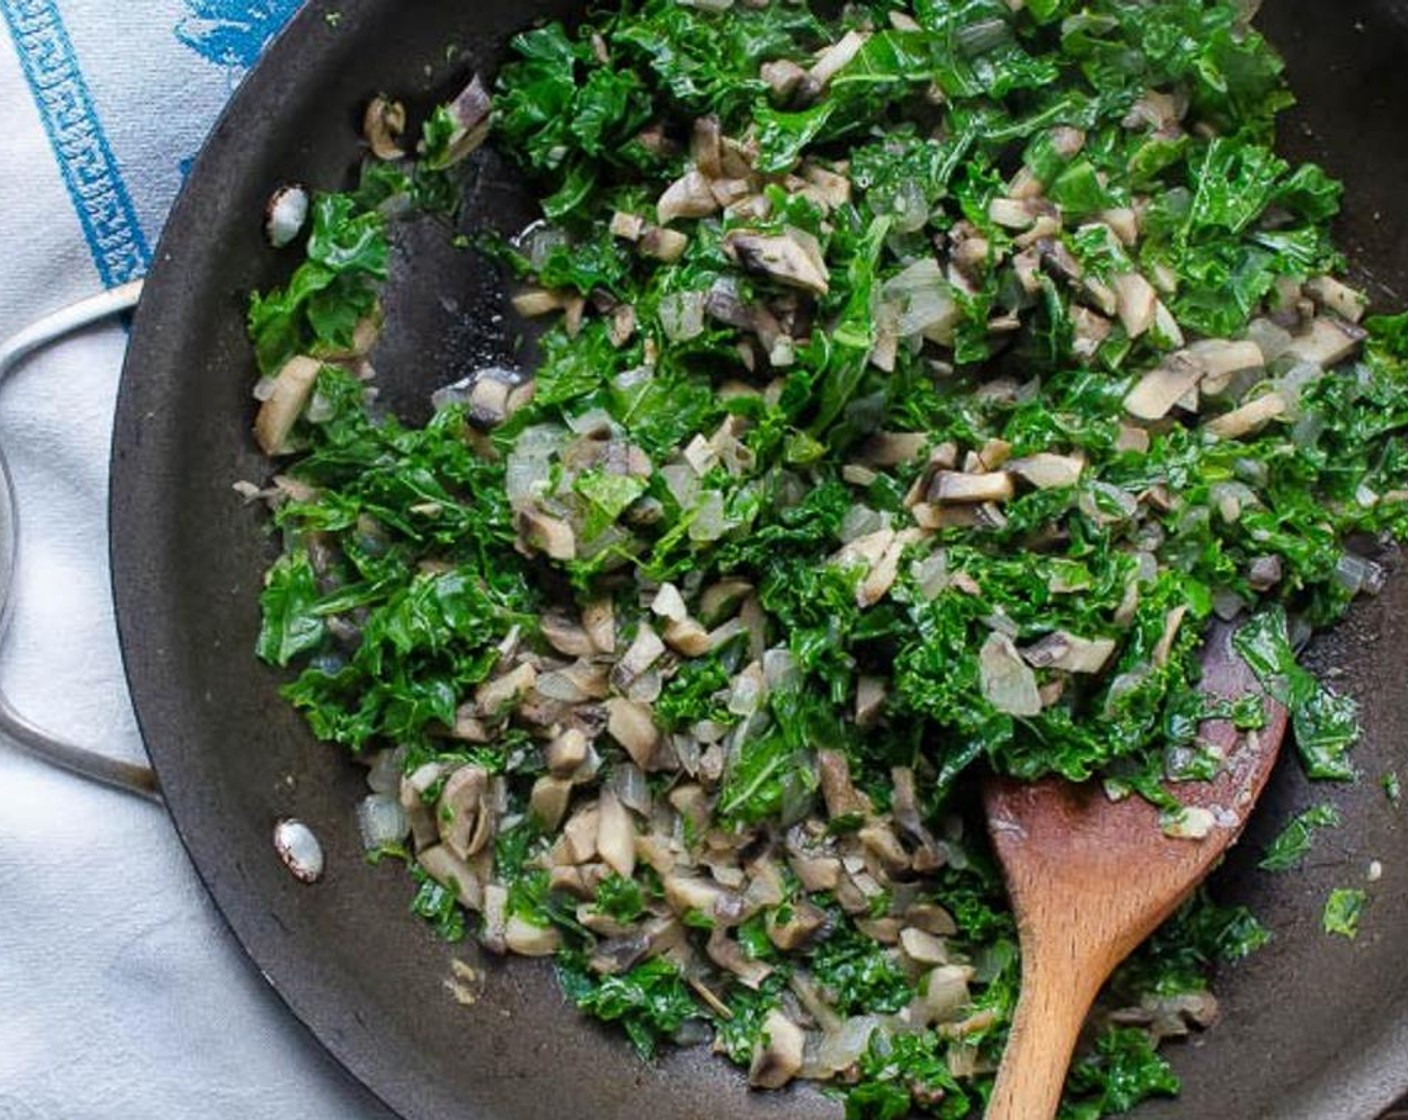 step 7 Stir in the Kale (2 cups) and Vegetable Broth (1/4 cup), cover and reduce heat to a simmer for 3 to 4 minutes until kale softens.